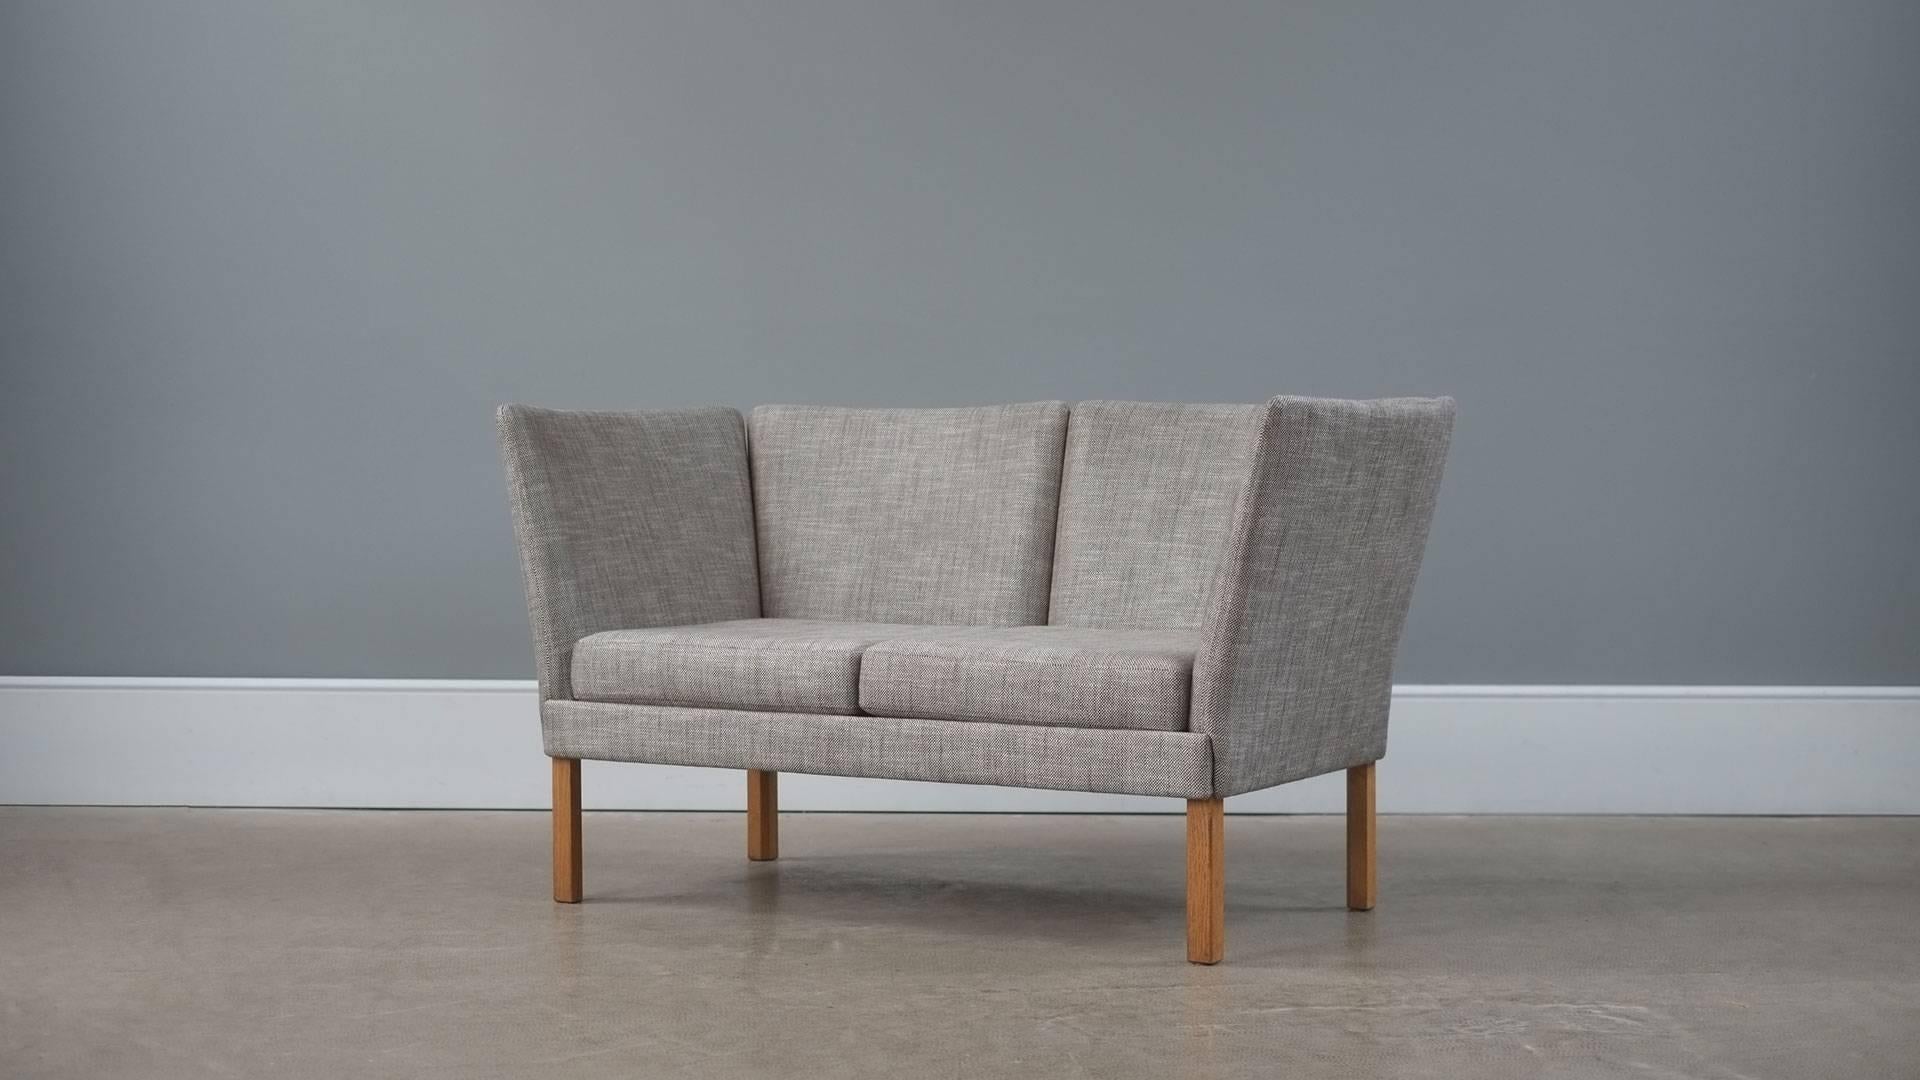 Beautiful Danish two seat sofa by Erik Jorgensen. Fully reconditioned and reupholstered in Romo Delano fabric. Lovely sofa.